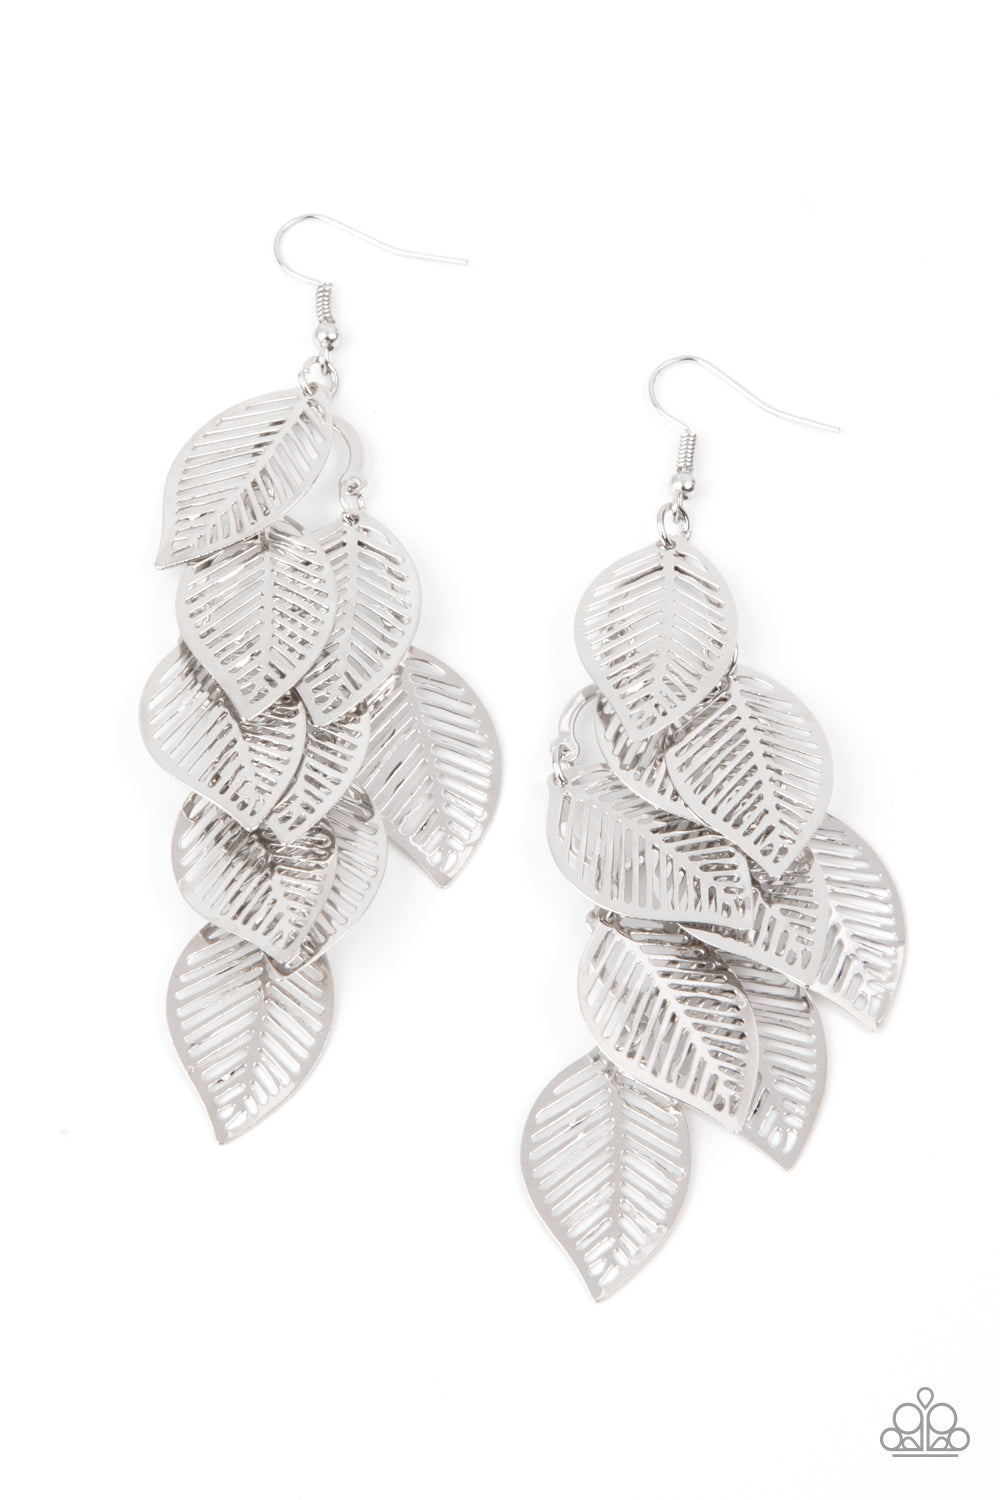 Paparazzi Accessories Limitless Leafy - Silver Earrings - Lady T Accessories